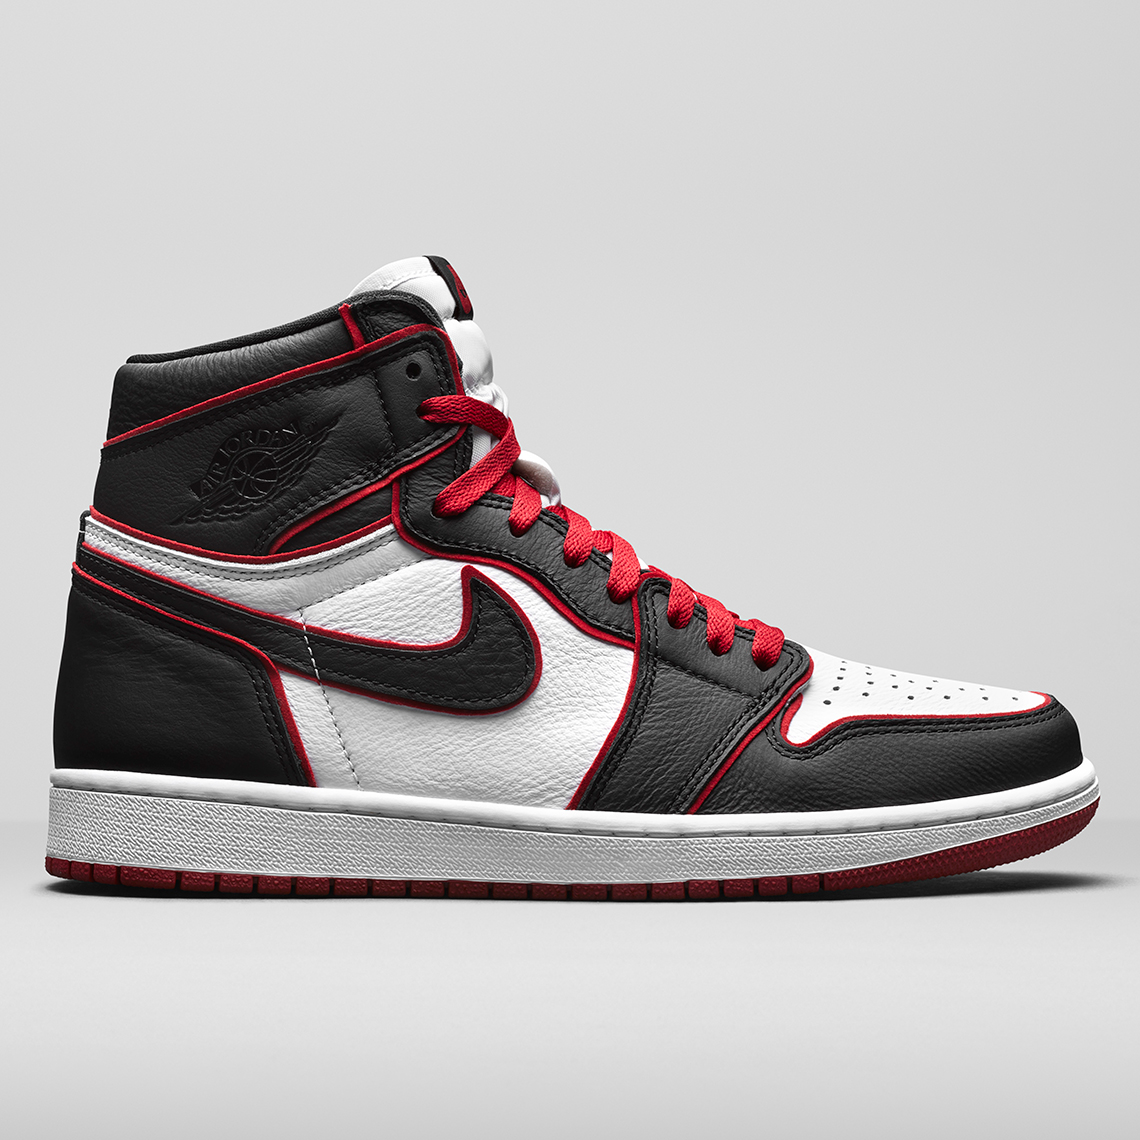 Jordan 1 Fearless Collection Release Dates | SneakerNews.com